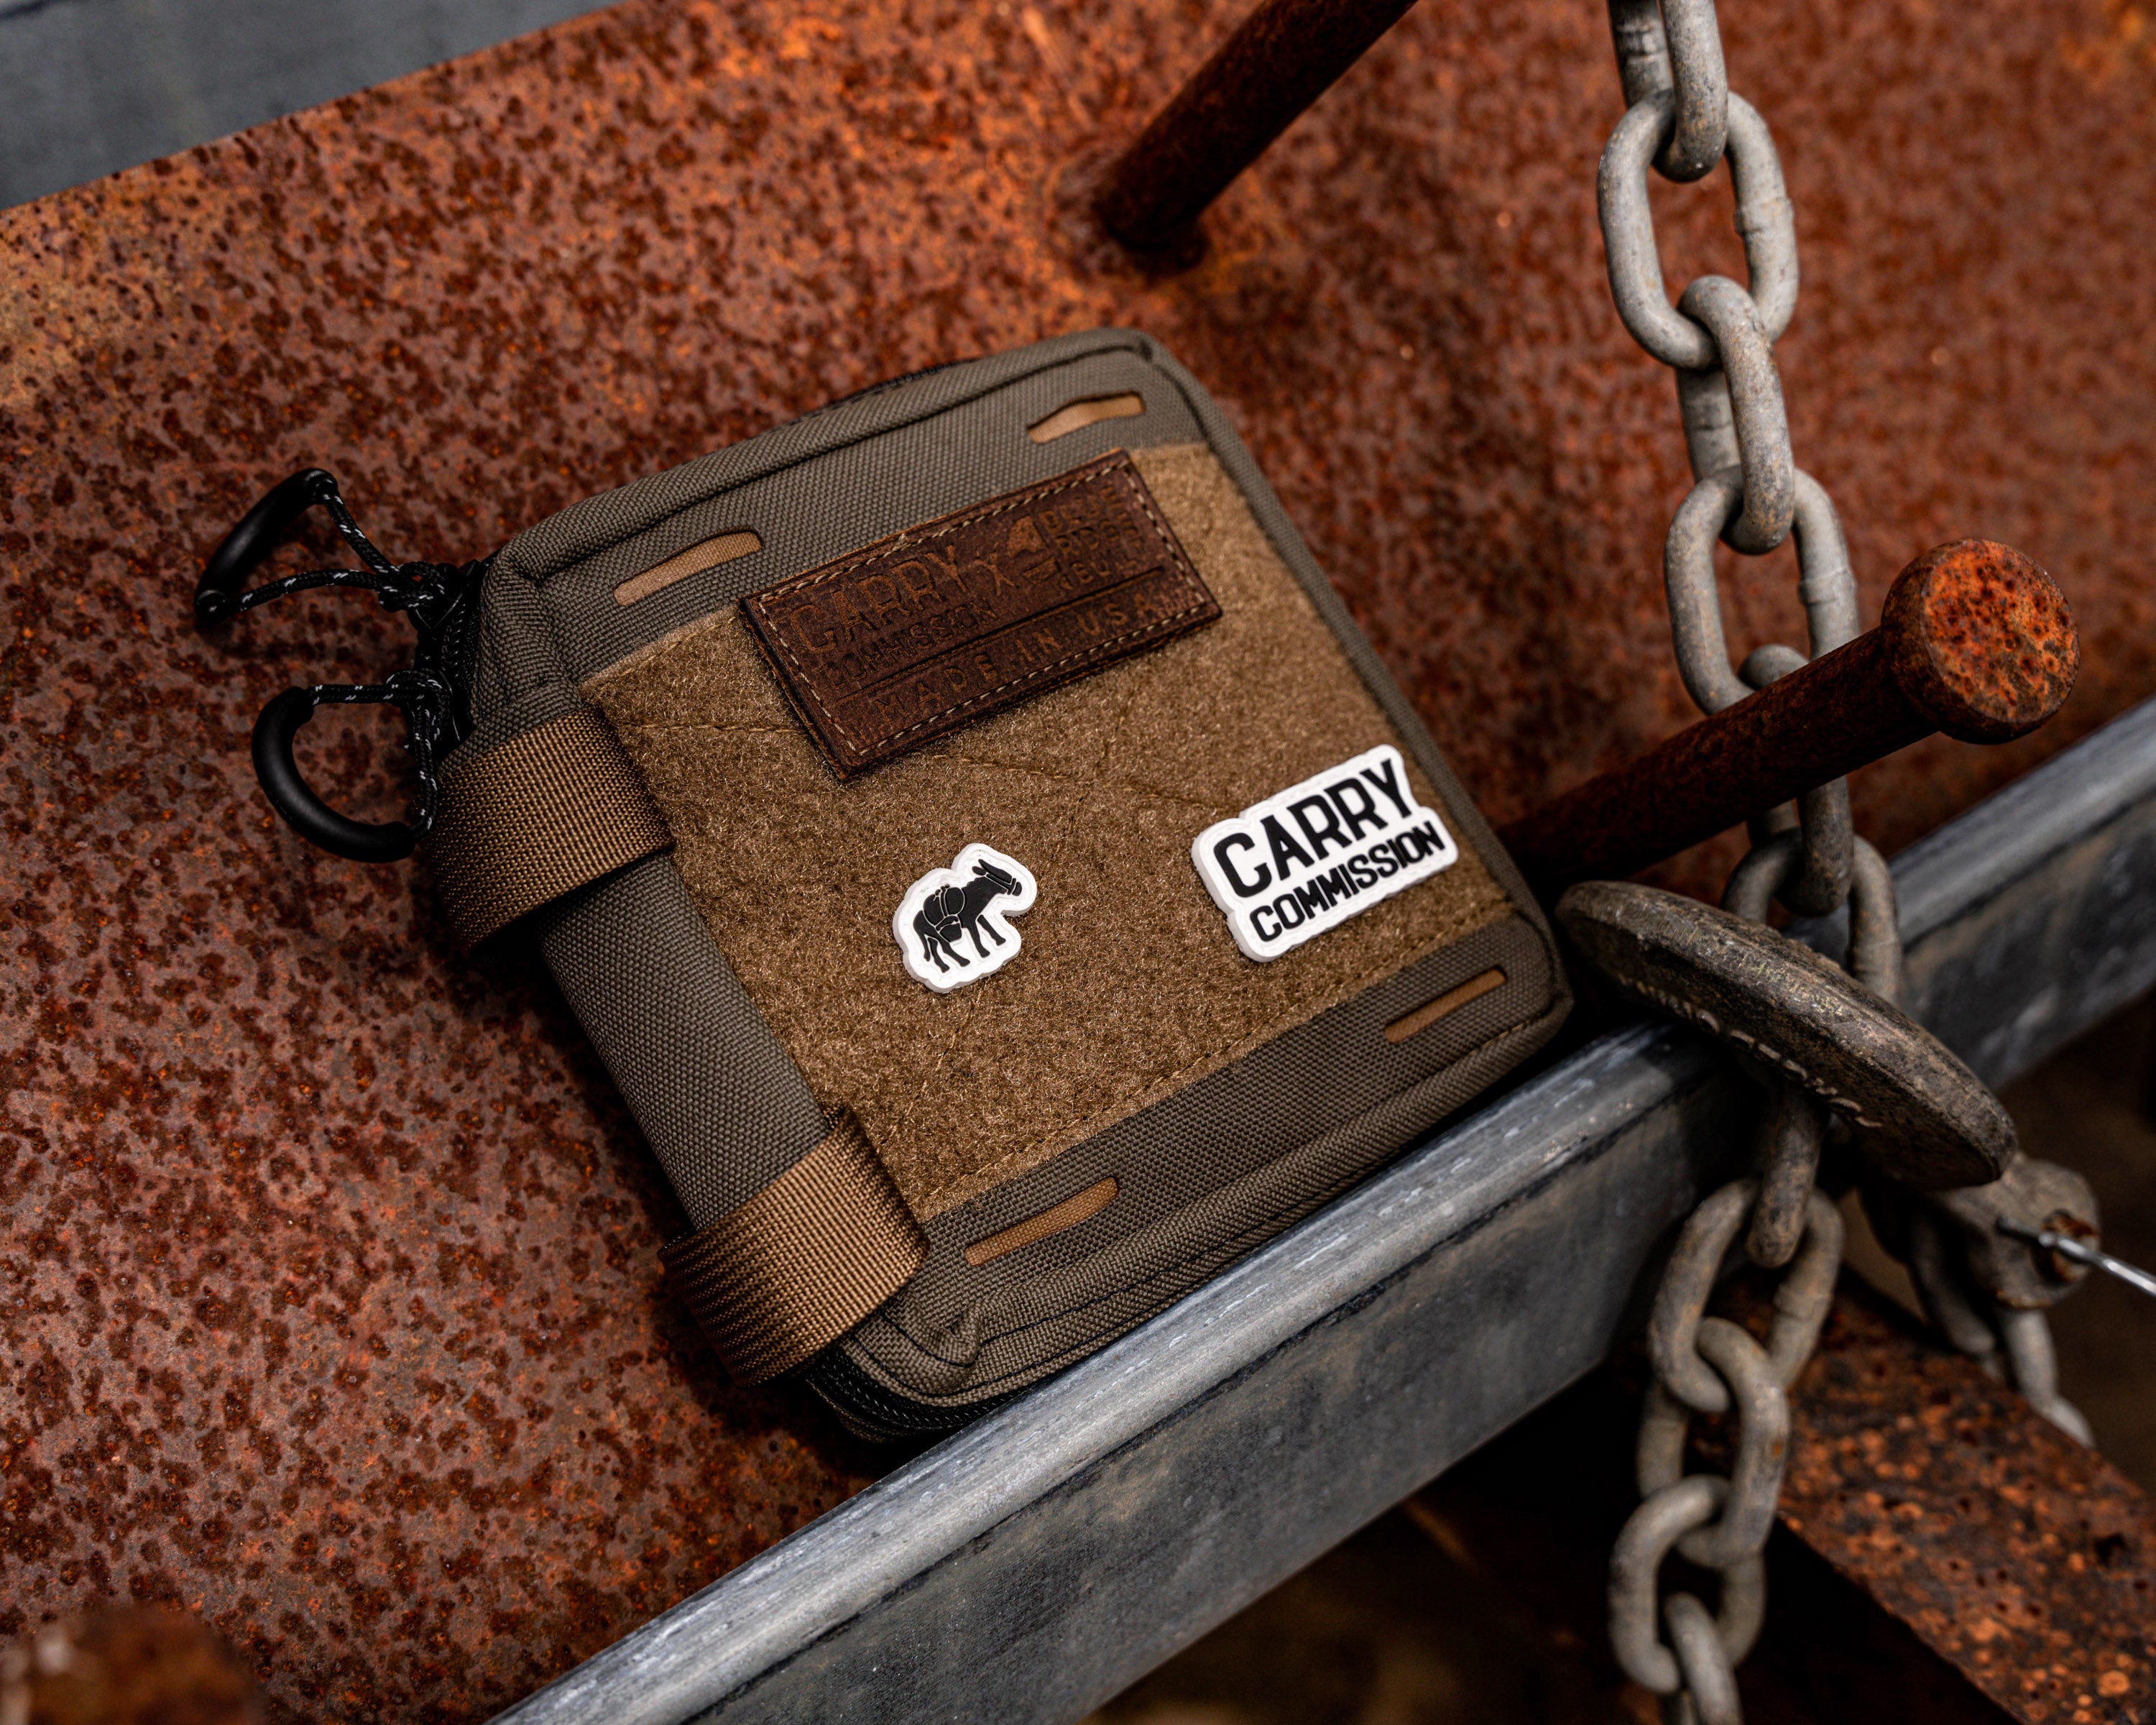 Carry Commission / Blue Ridge Overland Gear EDC Pouch Bundle front view set on a rusting metal backdrop with nail and chain also in view